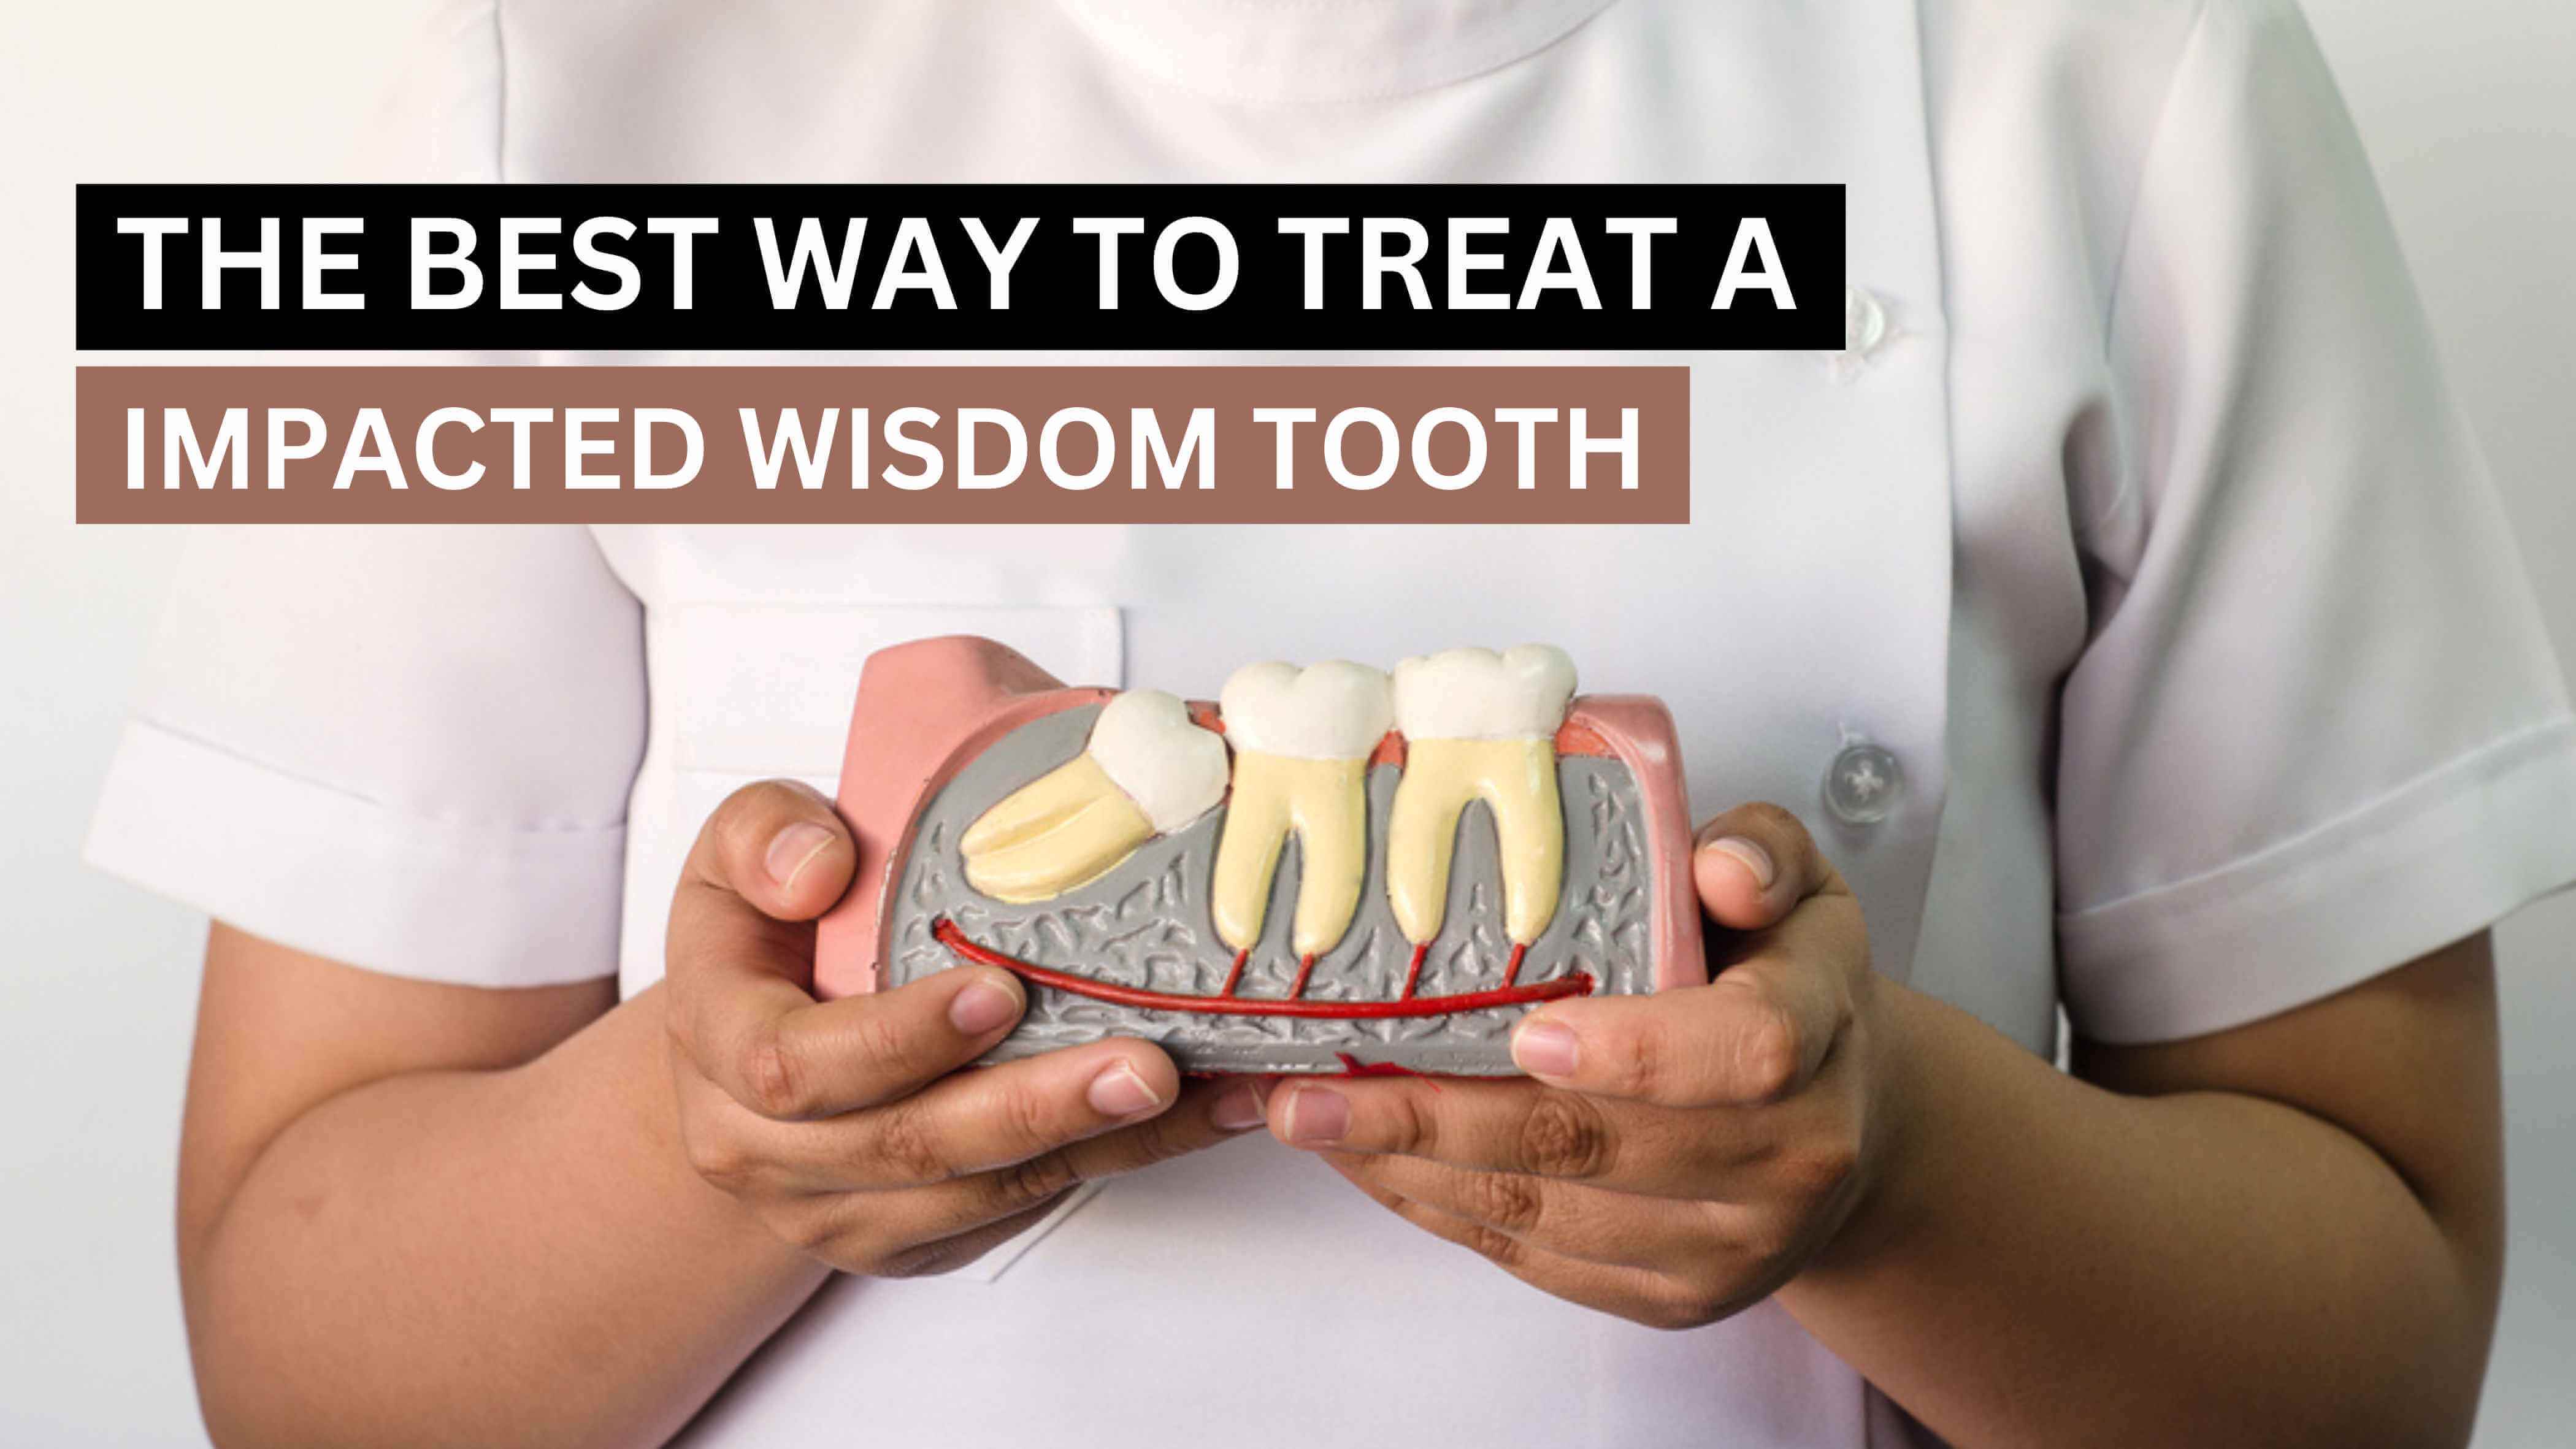 IMPACTED WISDOM TOOTH TREATMENT